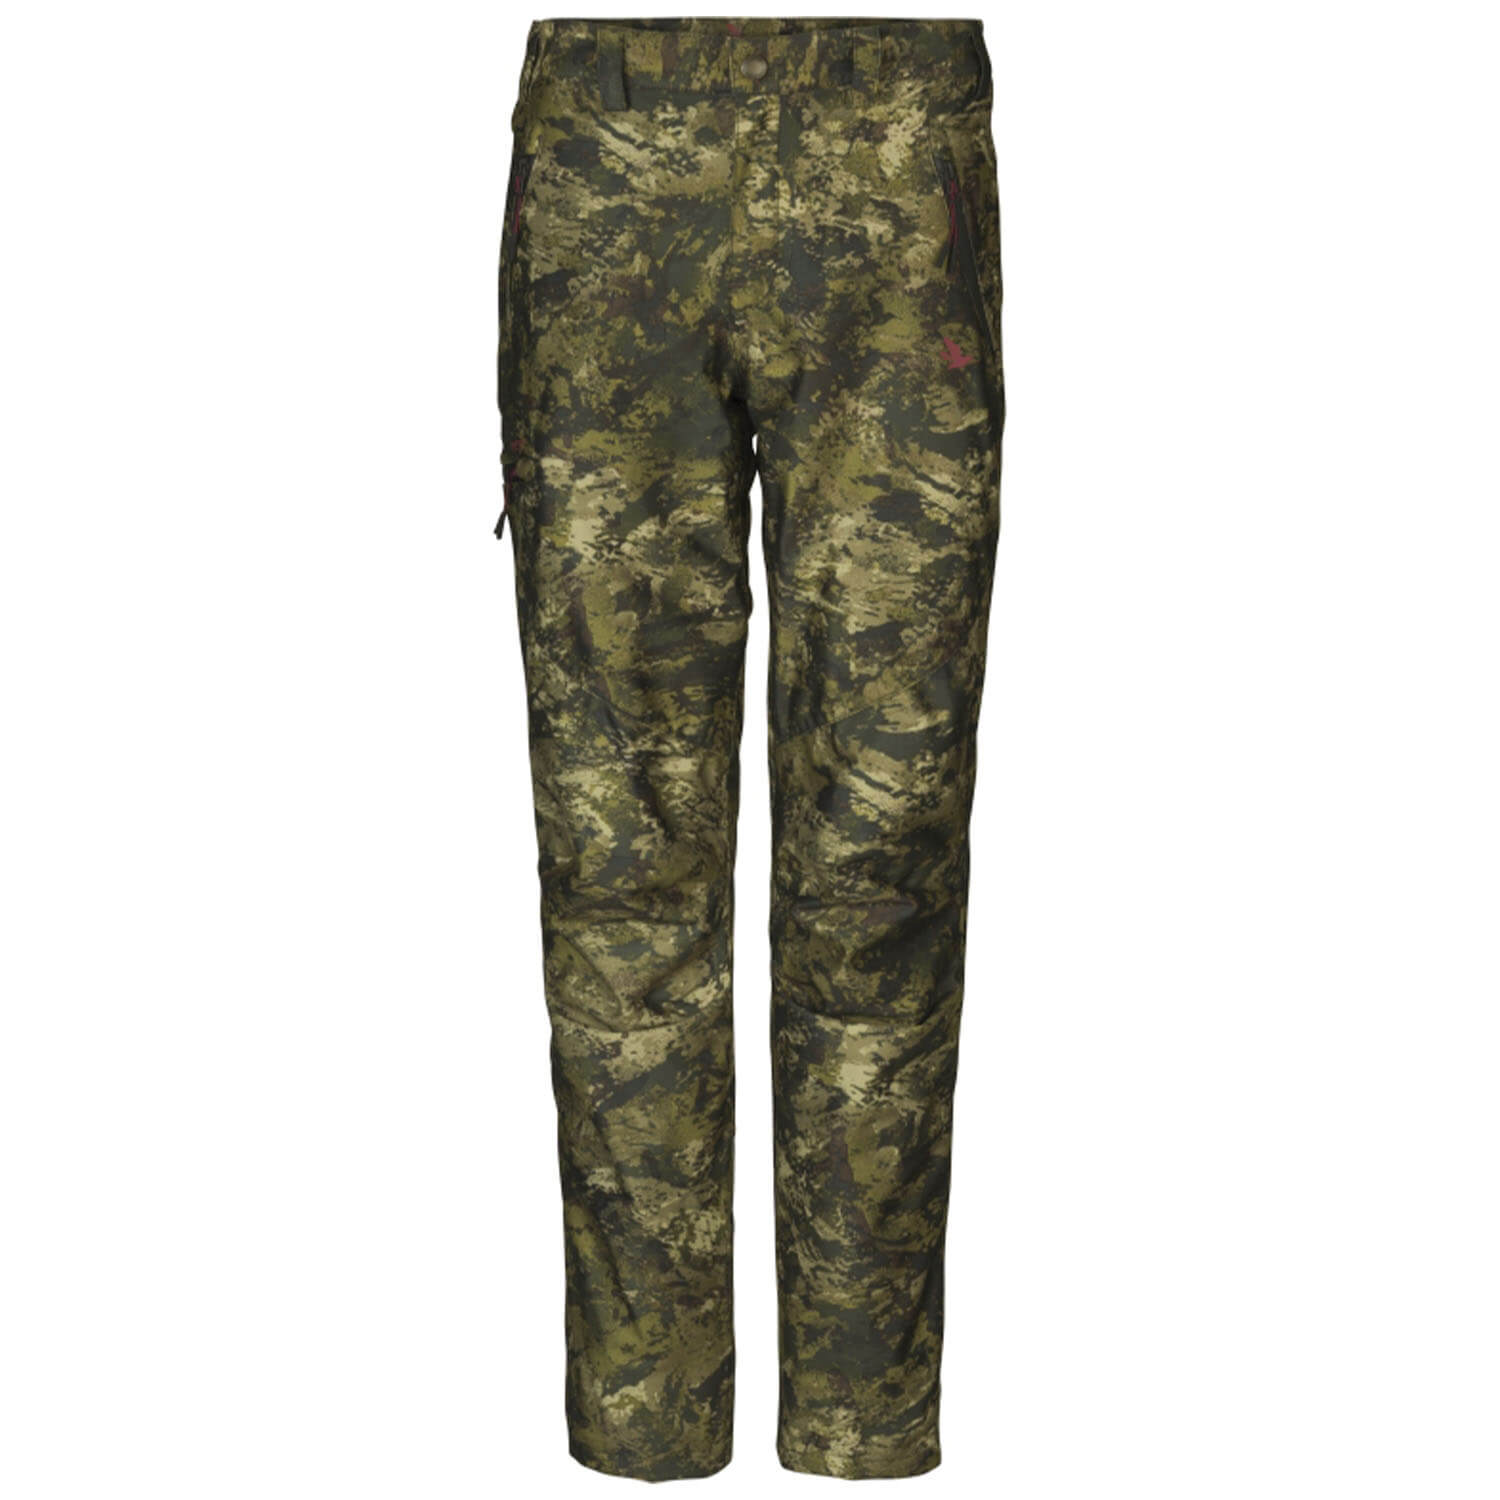 Seeland ladys hunting pants avail (InVis) - For Ladies